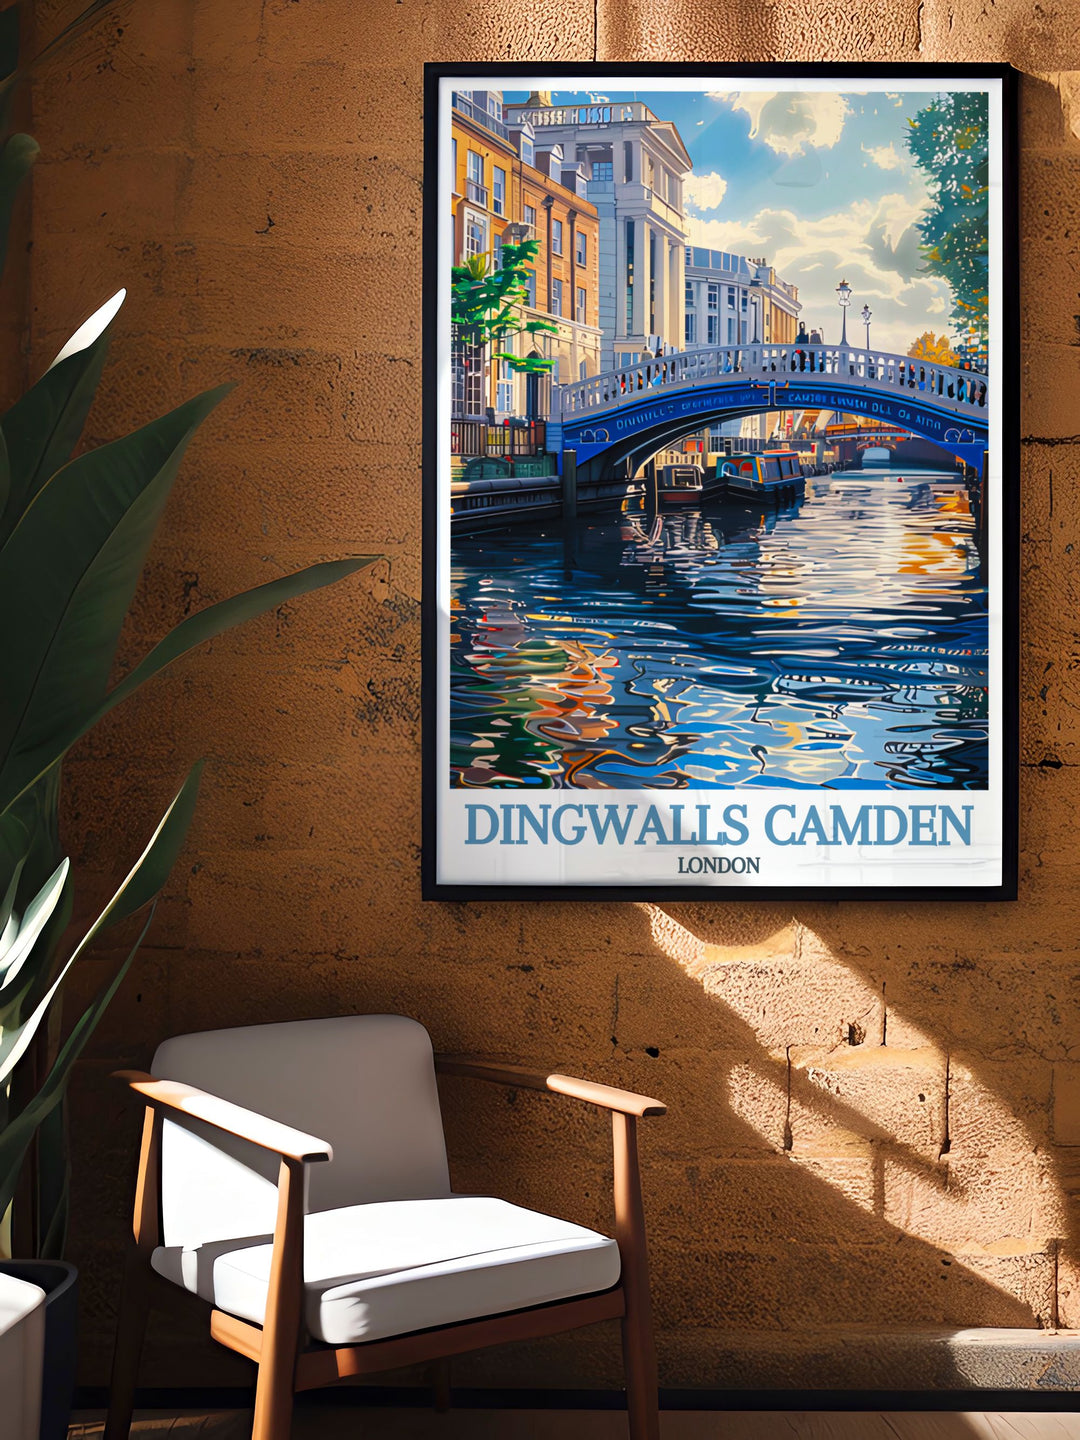 Dingwalls Camden, a legendary music venue, is depicted in this poster, celebrating its storied past and vibrant energy, perfect for music lovers and cultural enthusiasts.